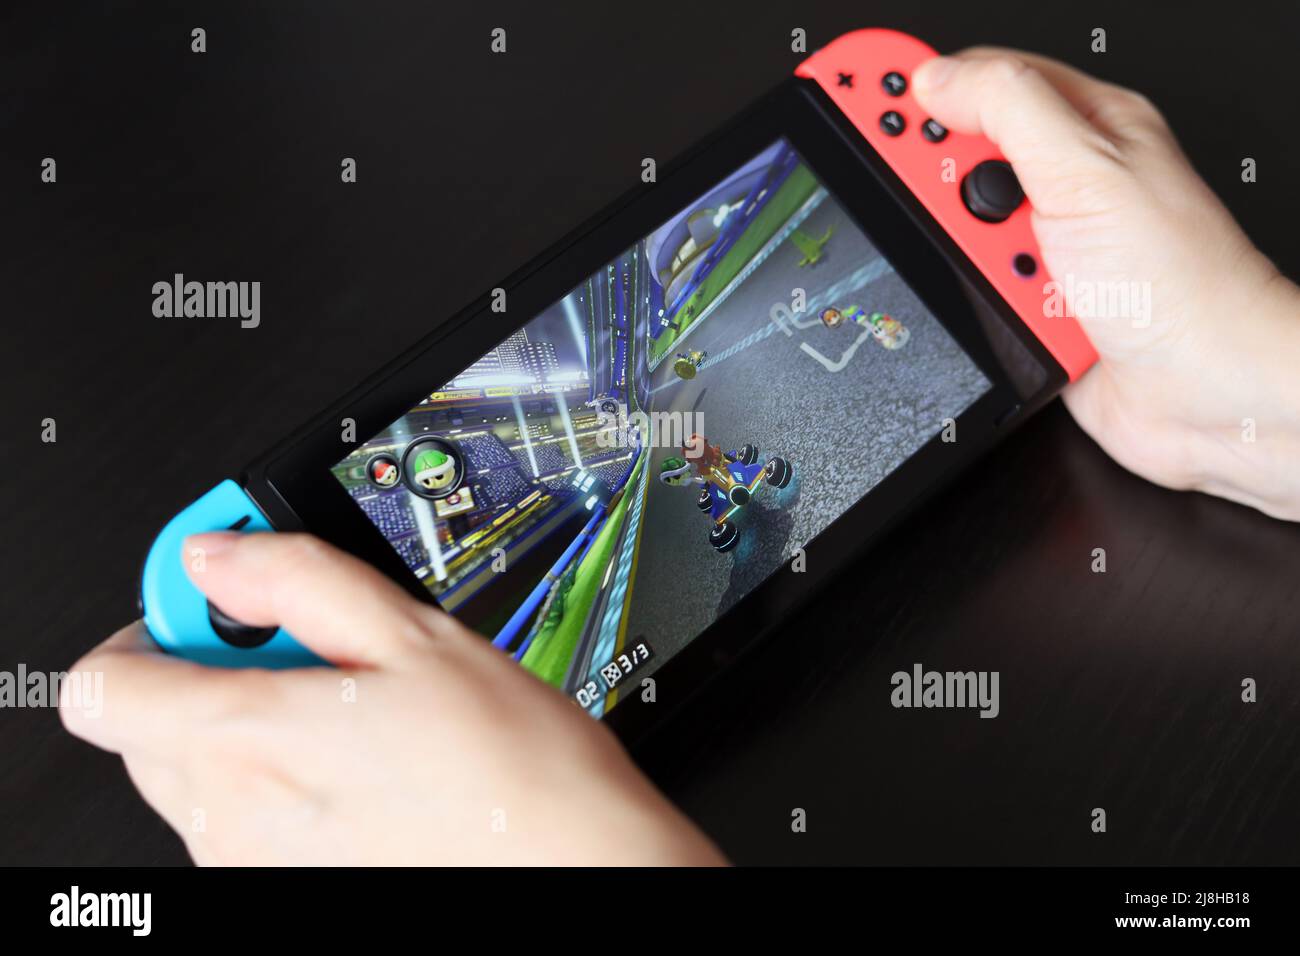 Girl playing Mario Kart 8 game on Nintendo Switch console in handheld mode, selective focus on a screen Stock Photo